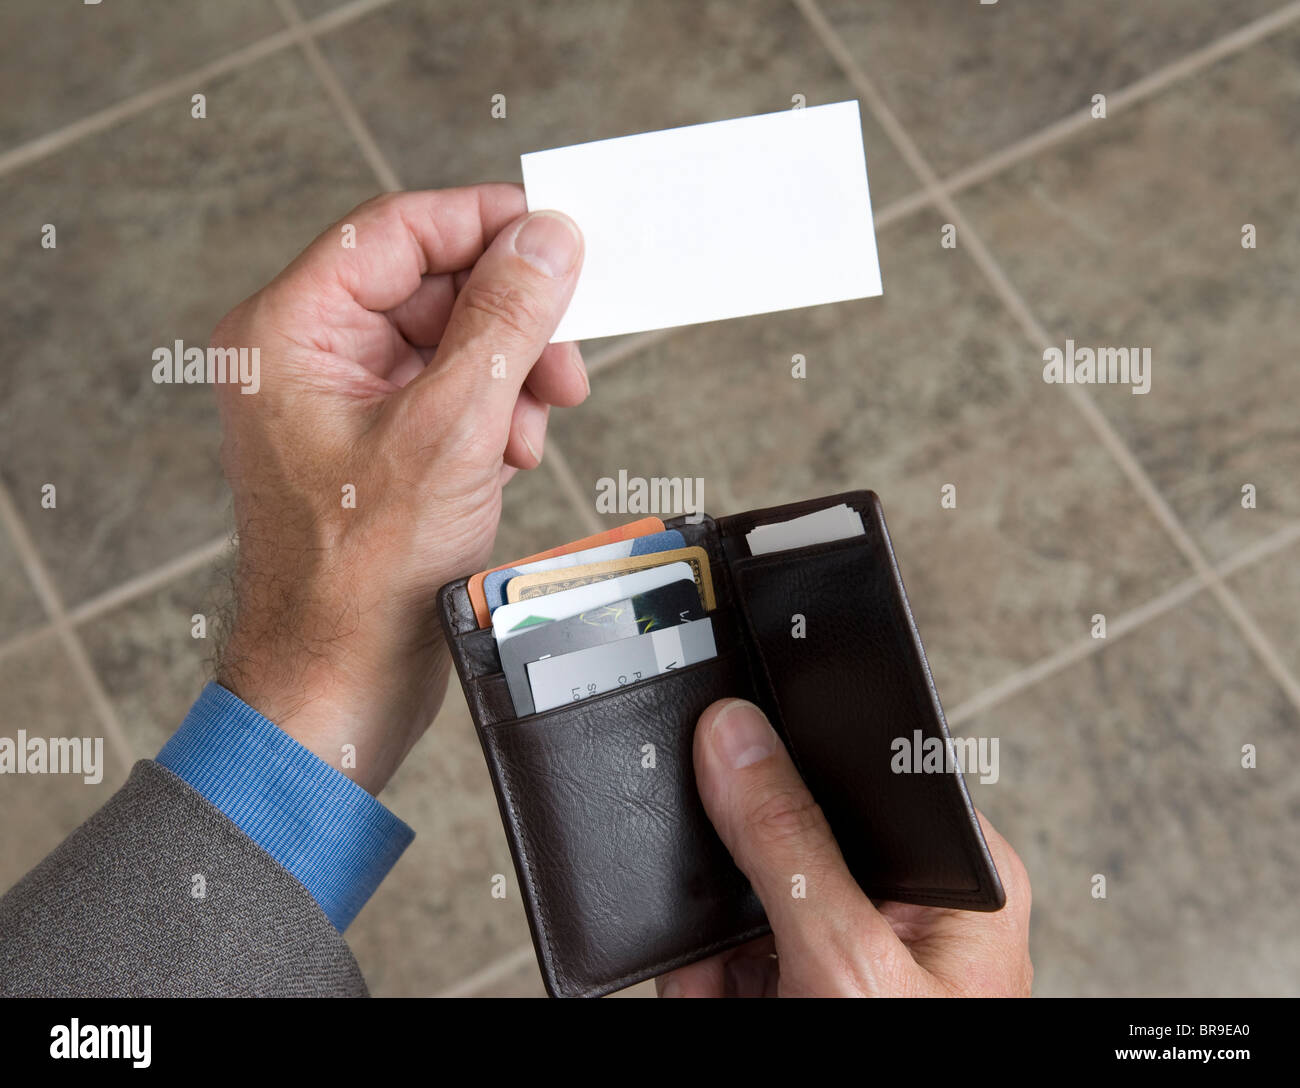 man holding his wallet and extending a blank business card Stock Photo